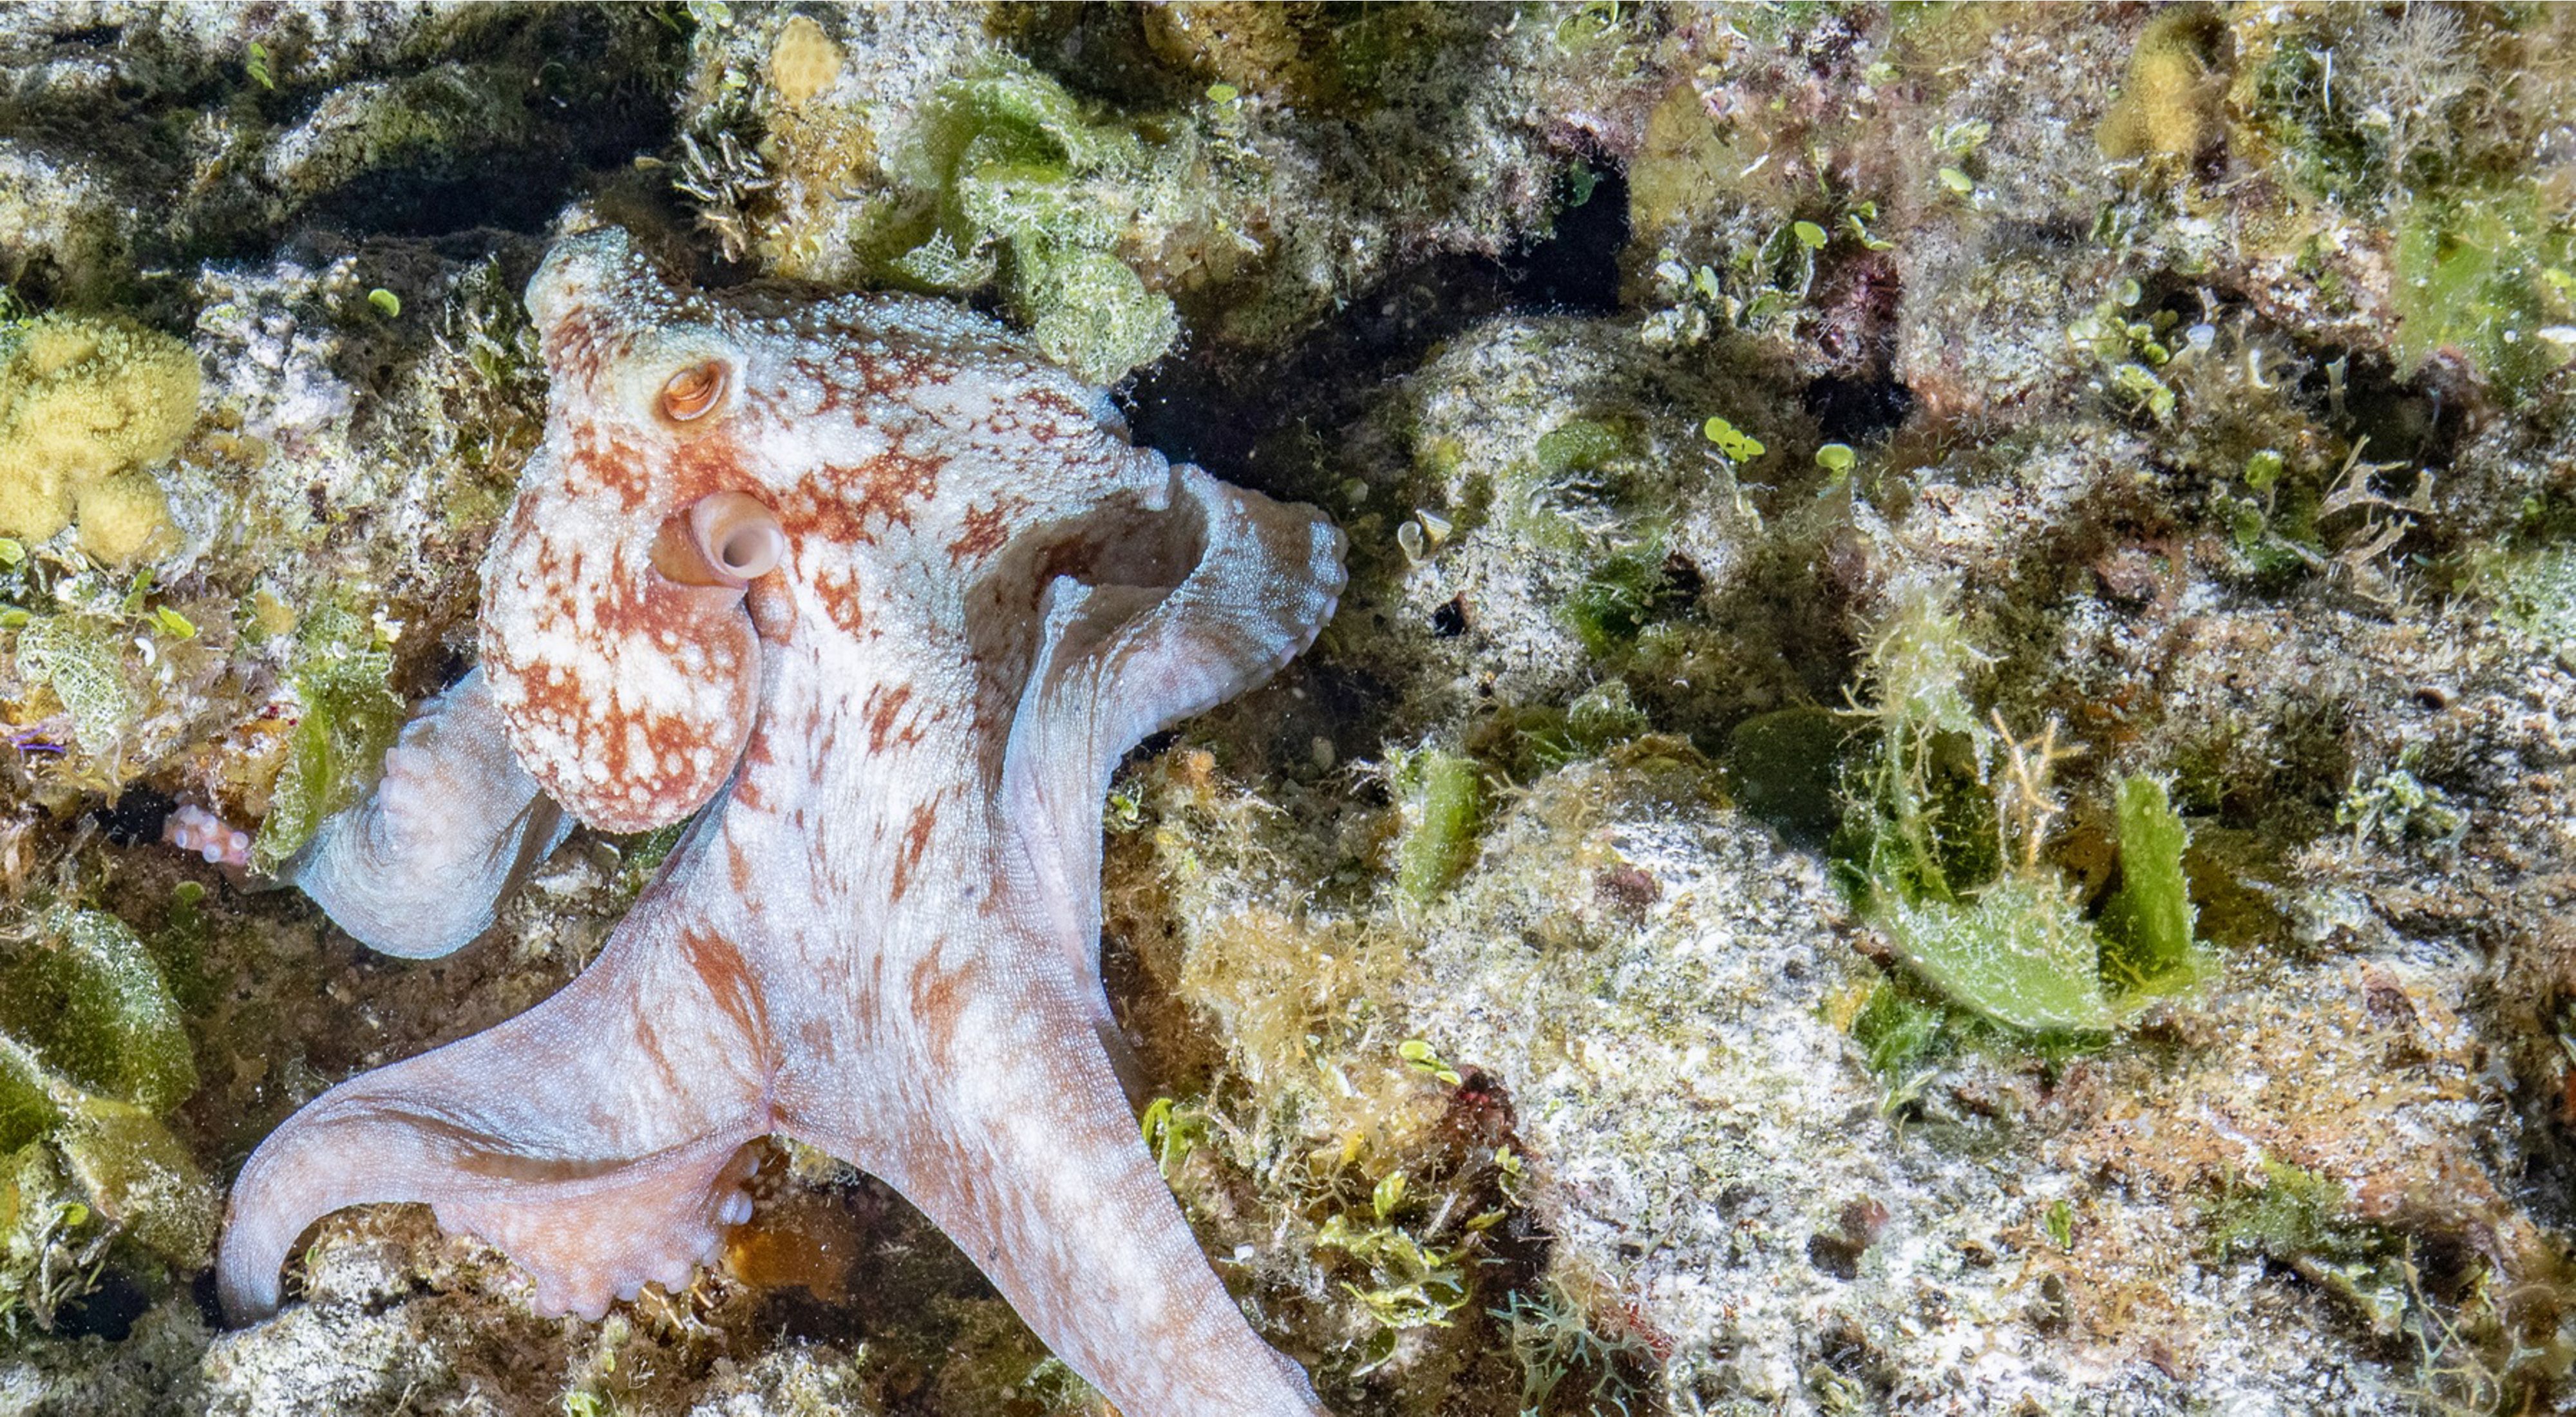 an octopus among rocks and coral in a reef